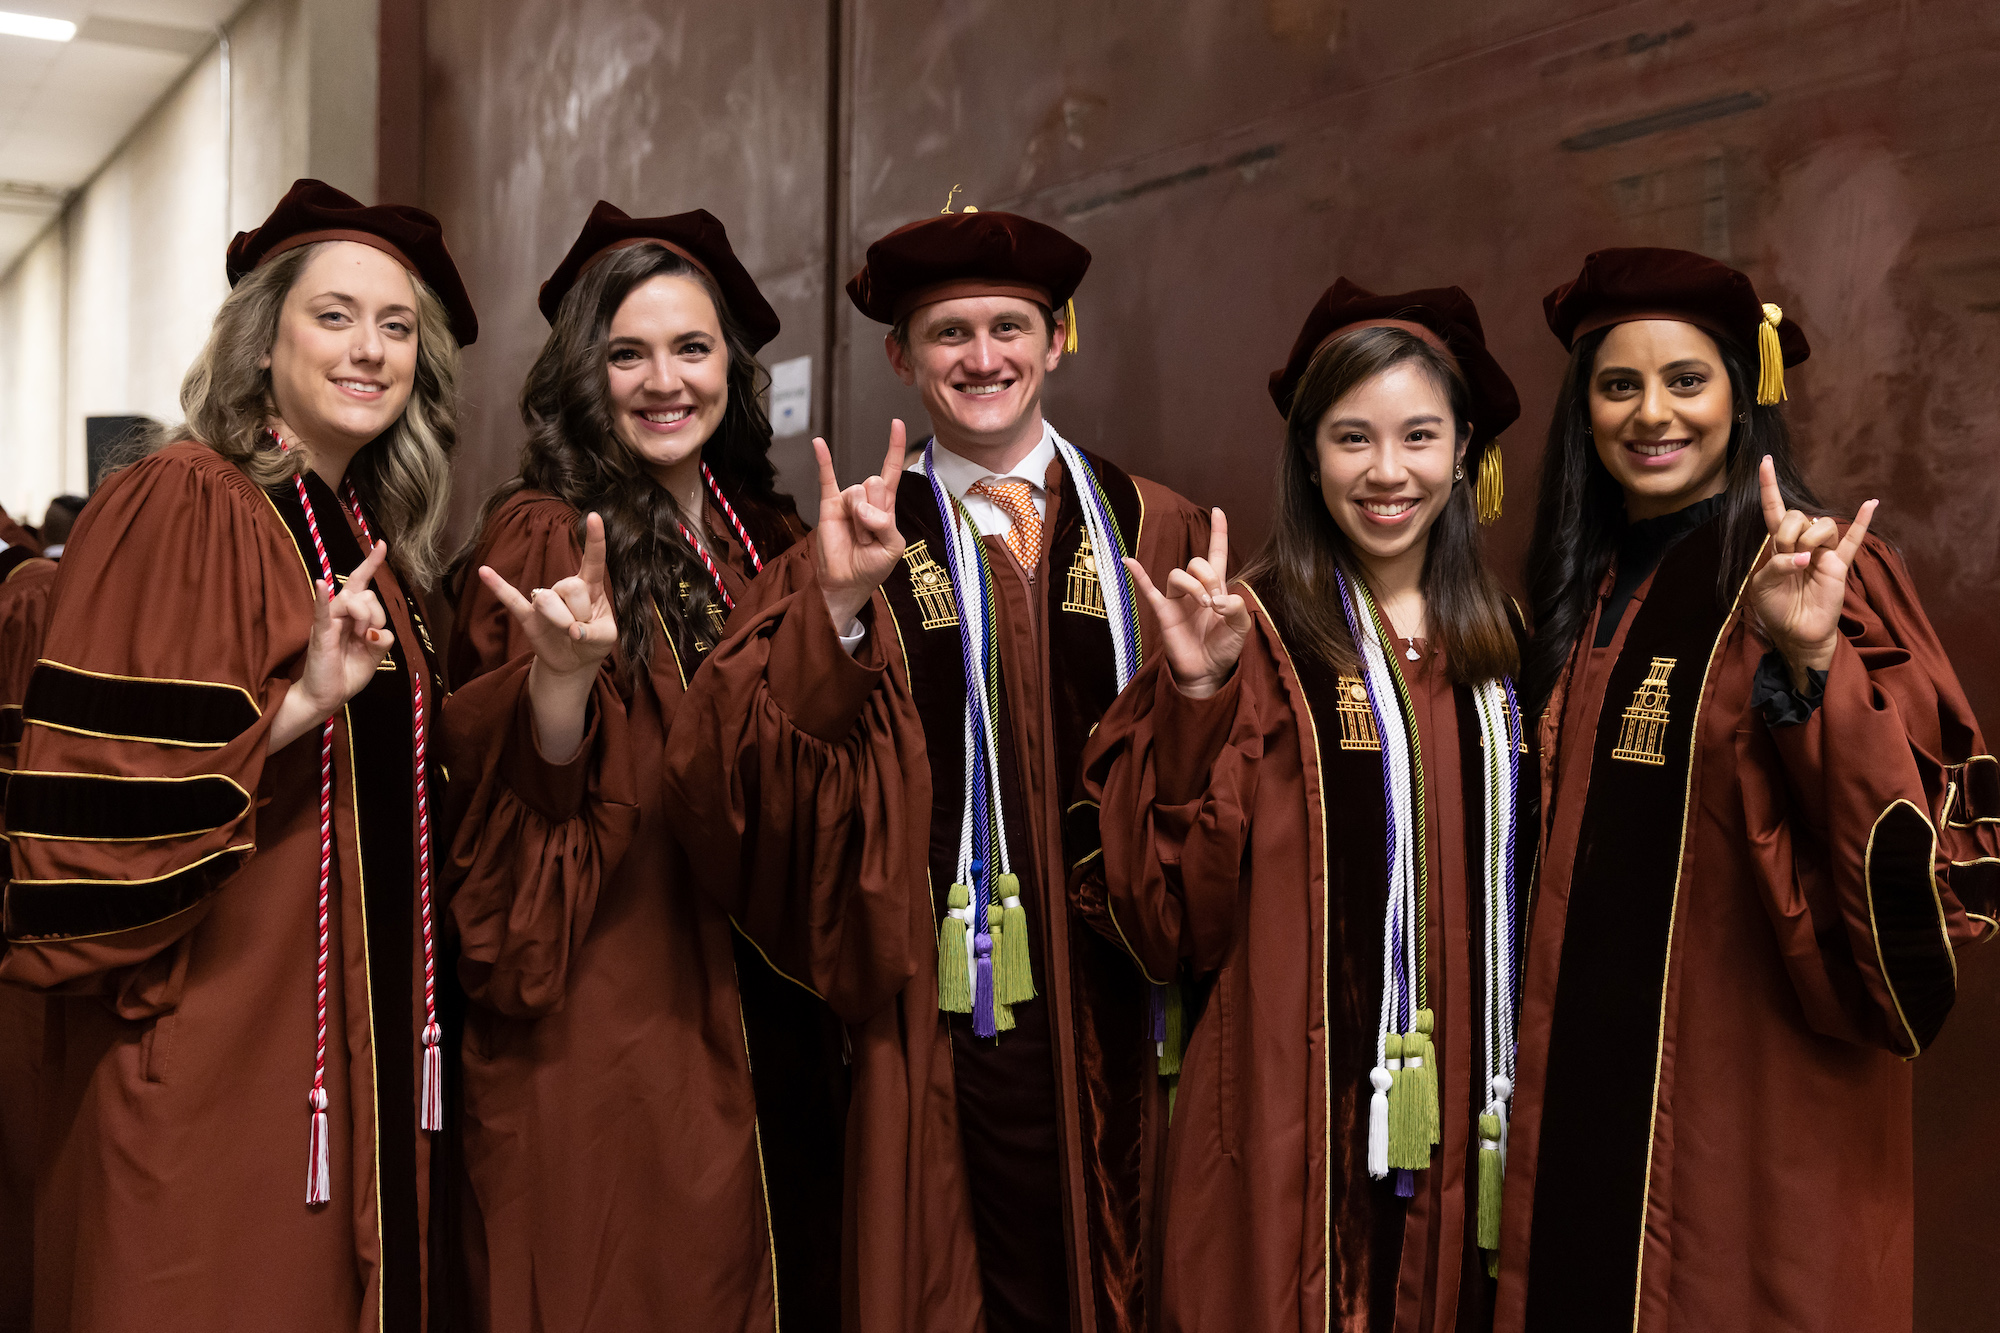 Five students wearing graduating caps and gowns and giving the Hook 'em Horns hand gesture while smiling.